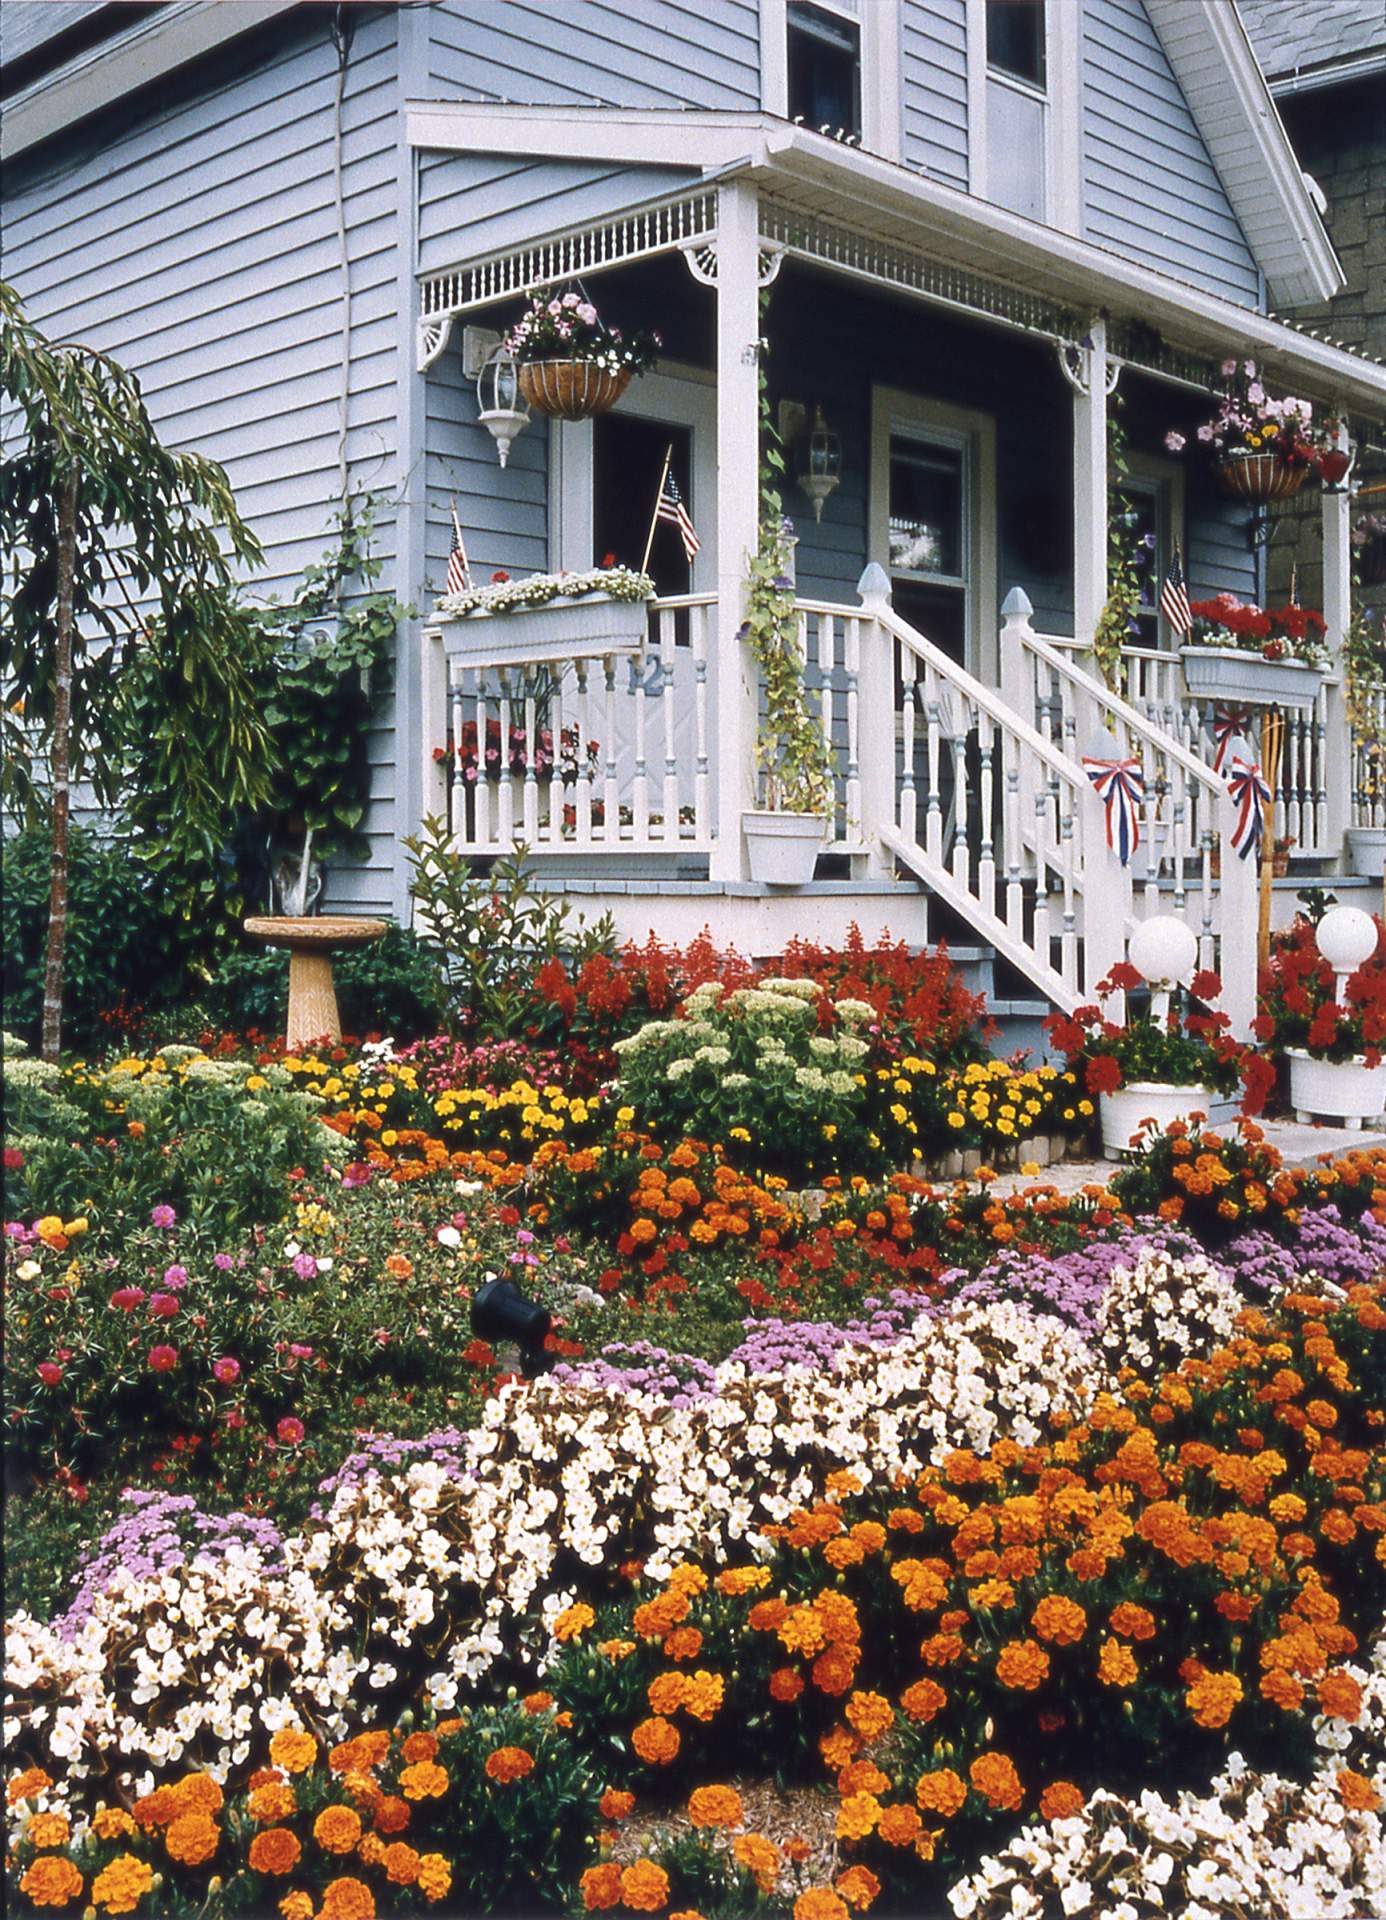 Barbara Null’s garden, Fillmore District Residential First Prize, ‘Buffalo in Bloom’ contest, Buffalo NY